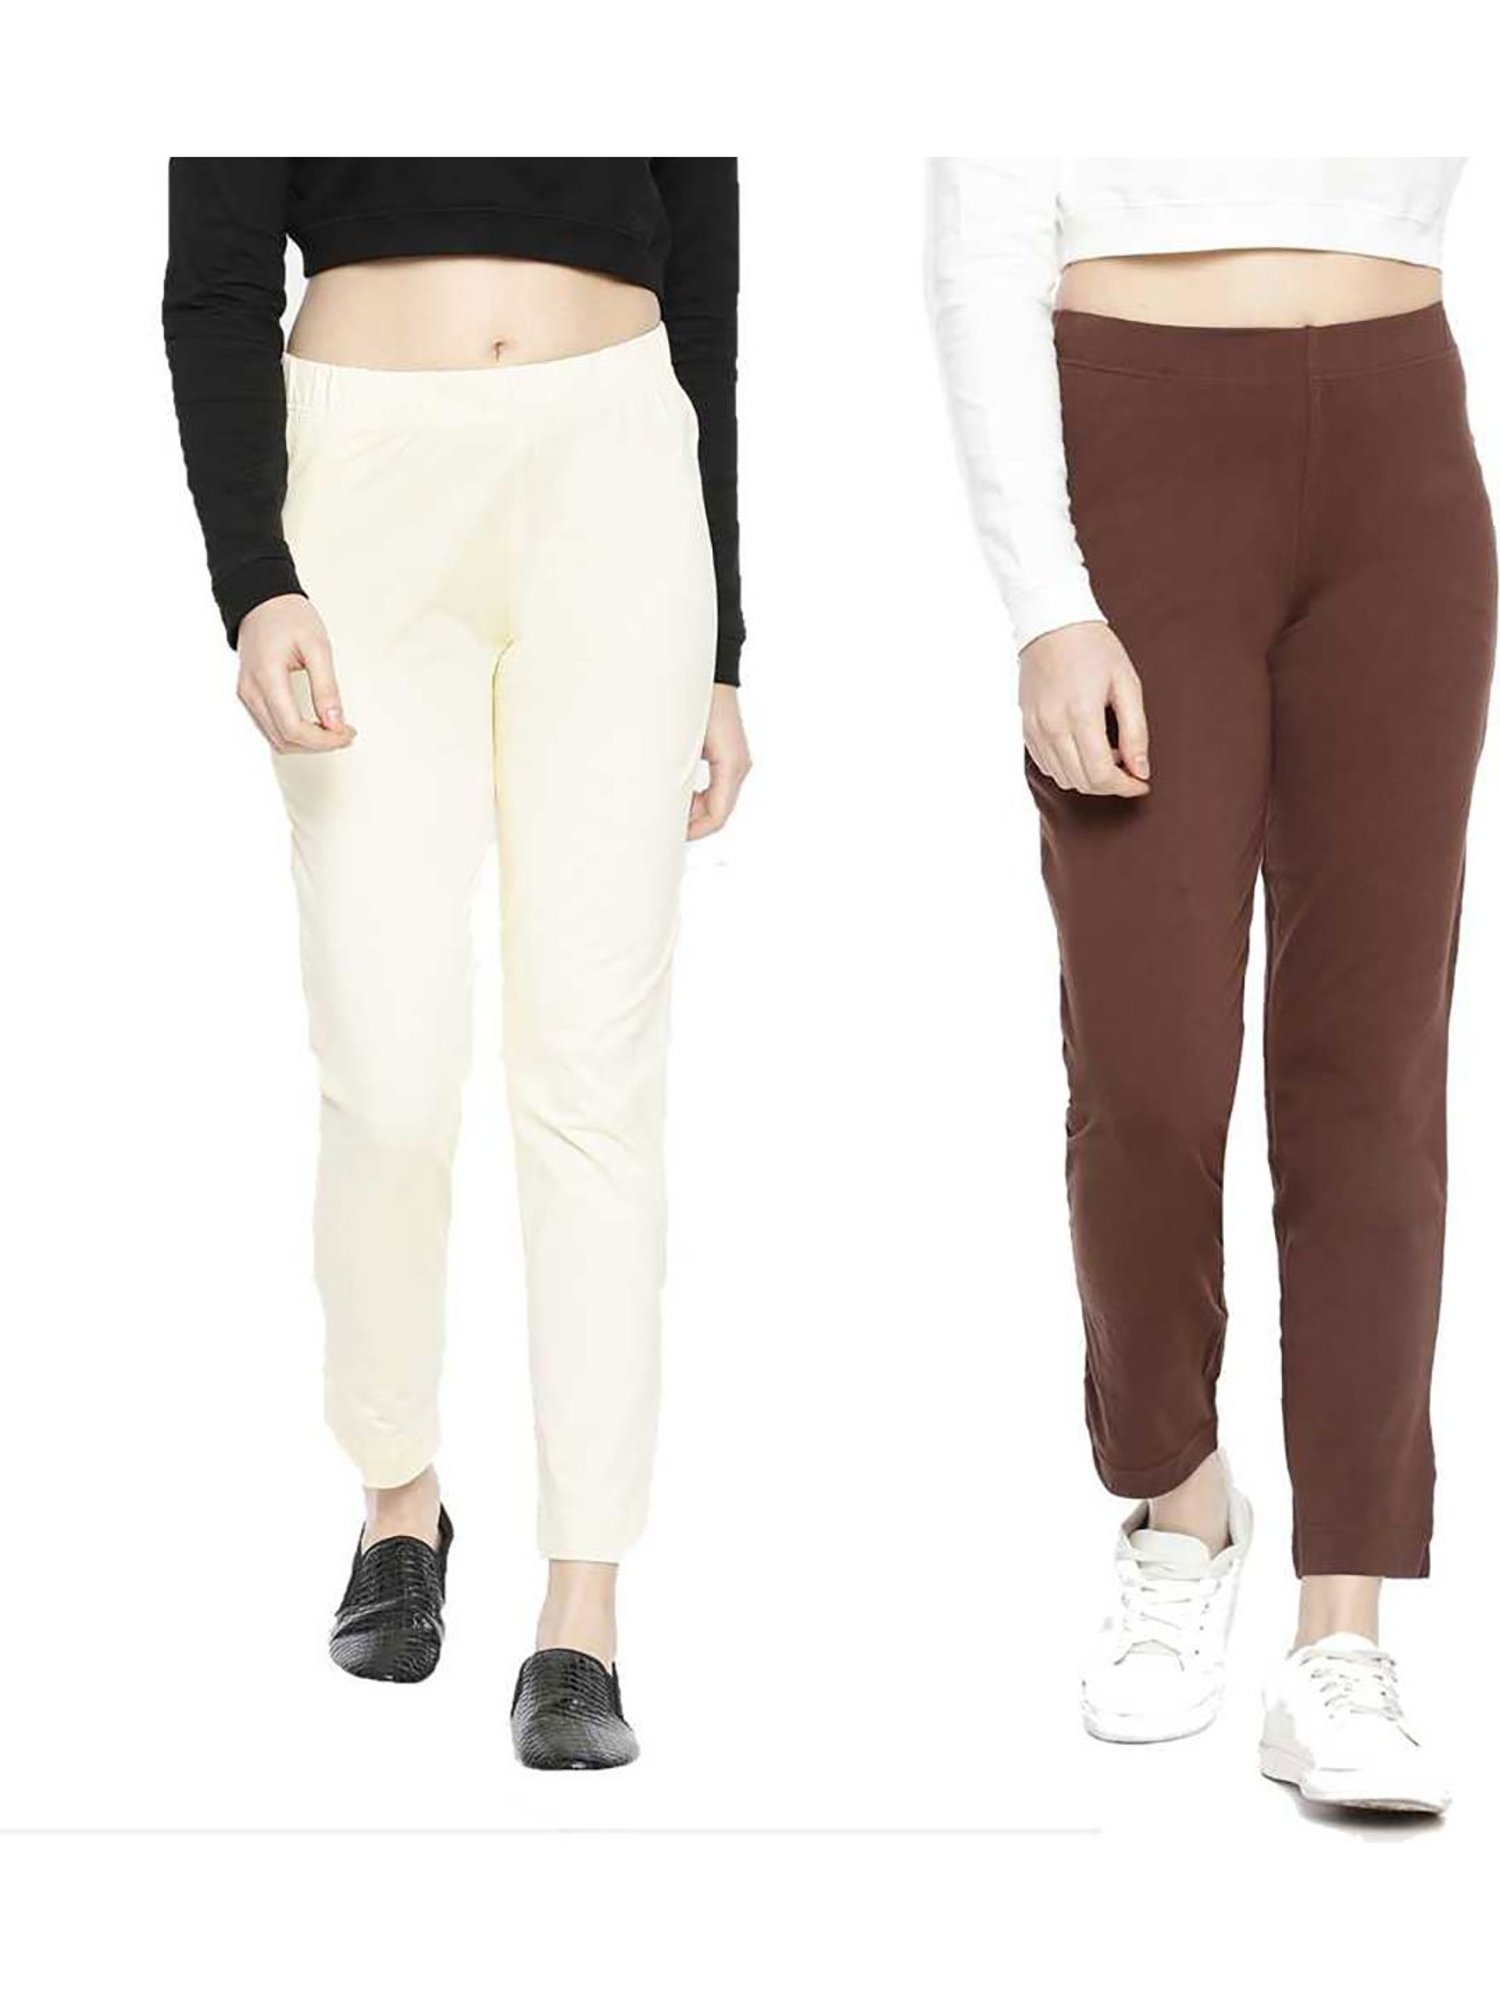 Buy ALIYAA TrousersPencilCigarette Pant for Womens  Girls Pack of 1  Brown at Amazonin